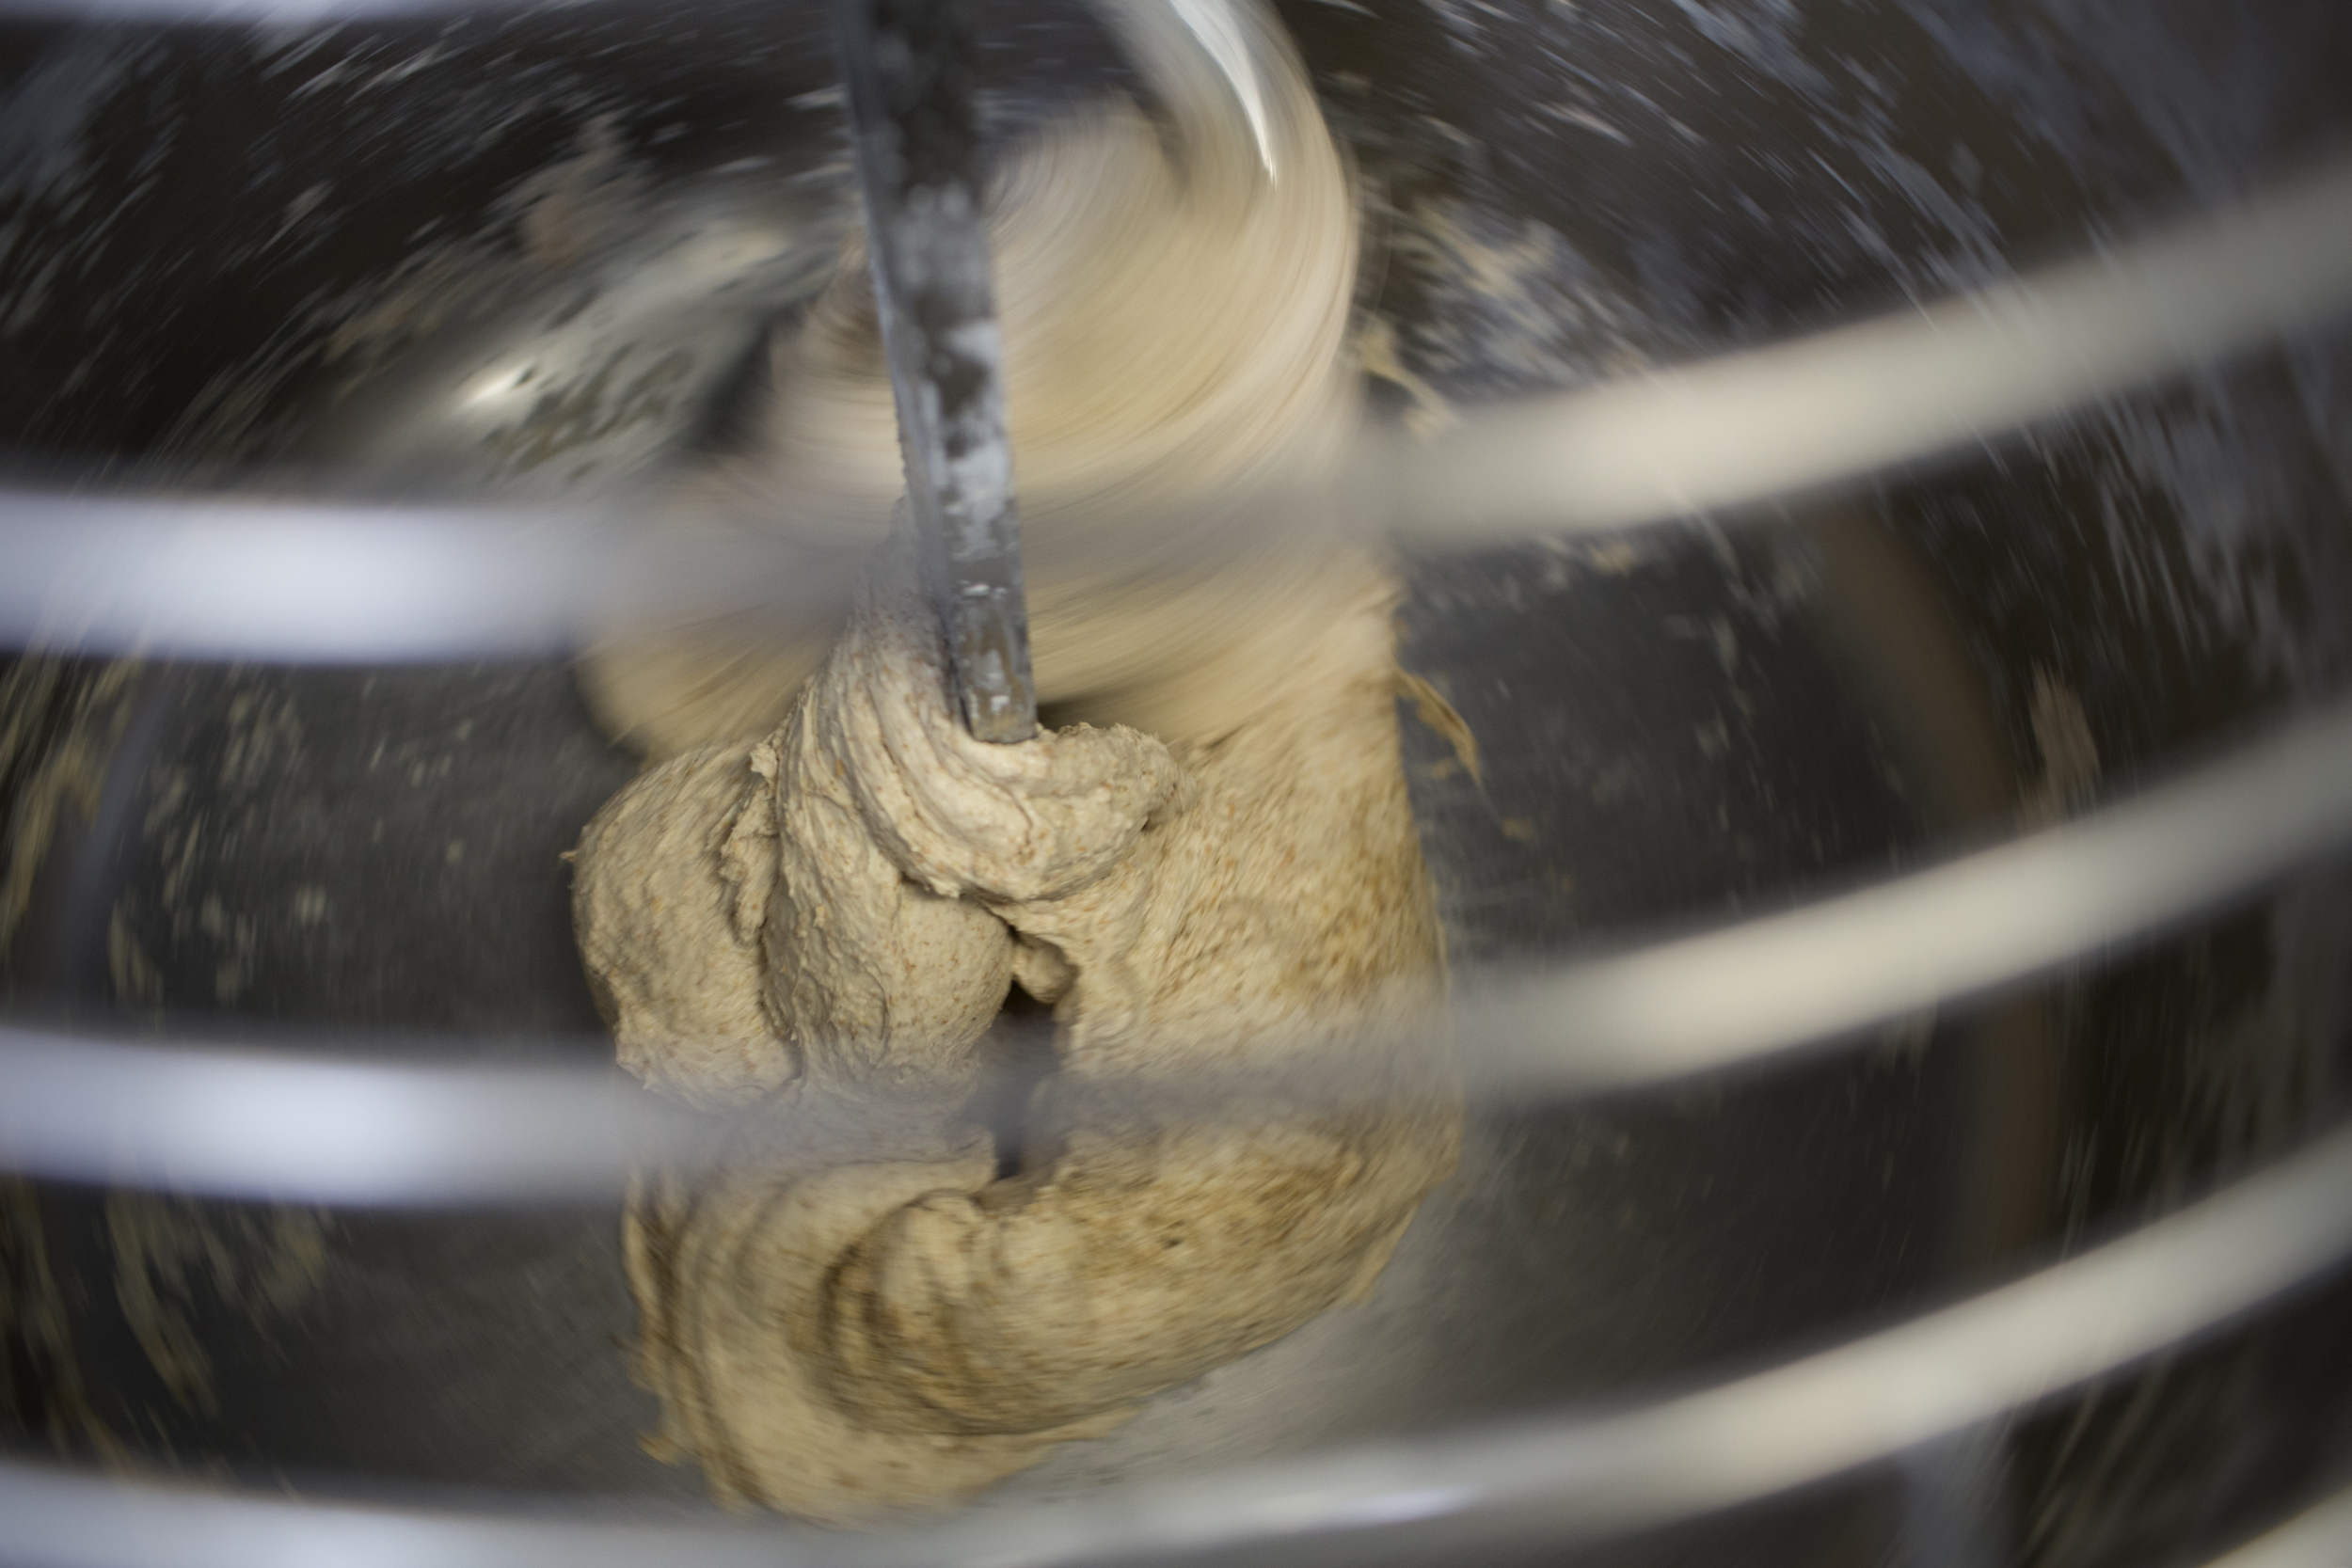 rye bread dough mixing in the spiral mixer at Runner &amp; Stone